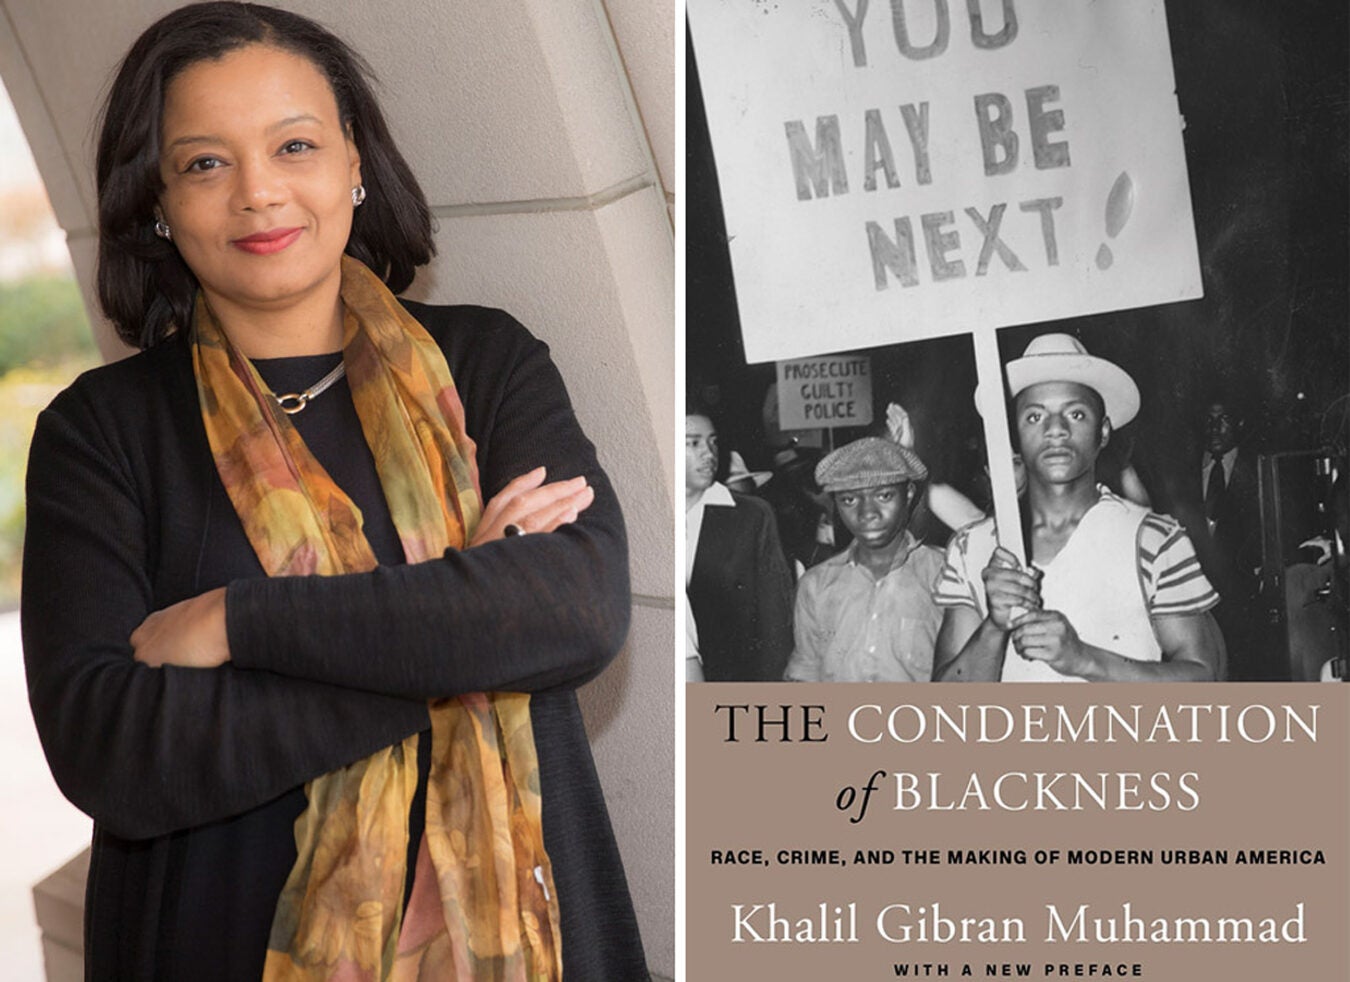 Tomiko Brown-Nagin and the Condemnation of Blackness book cover.